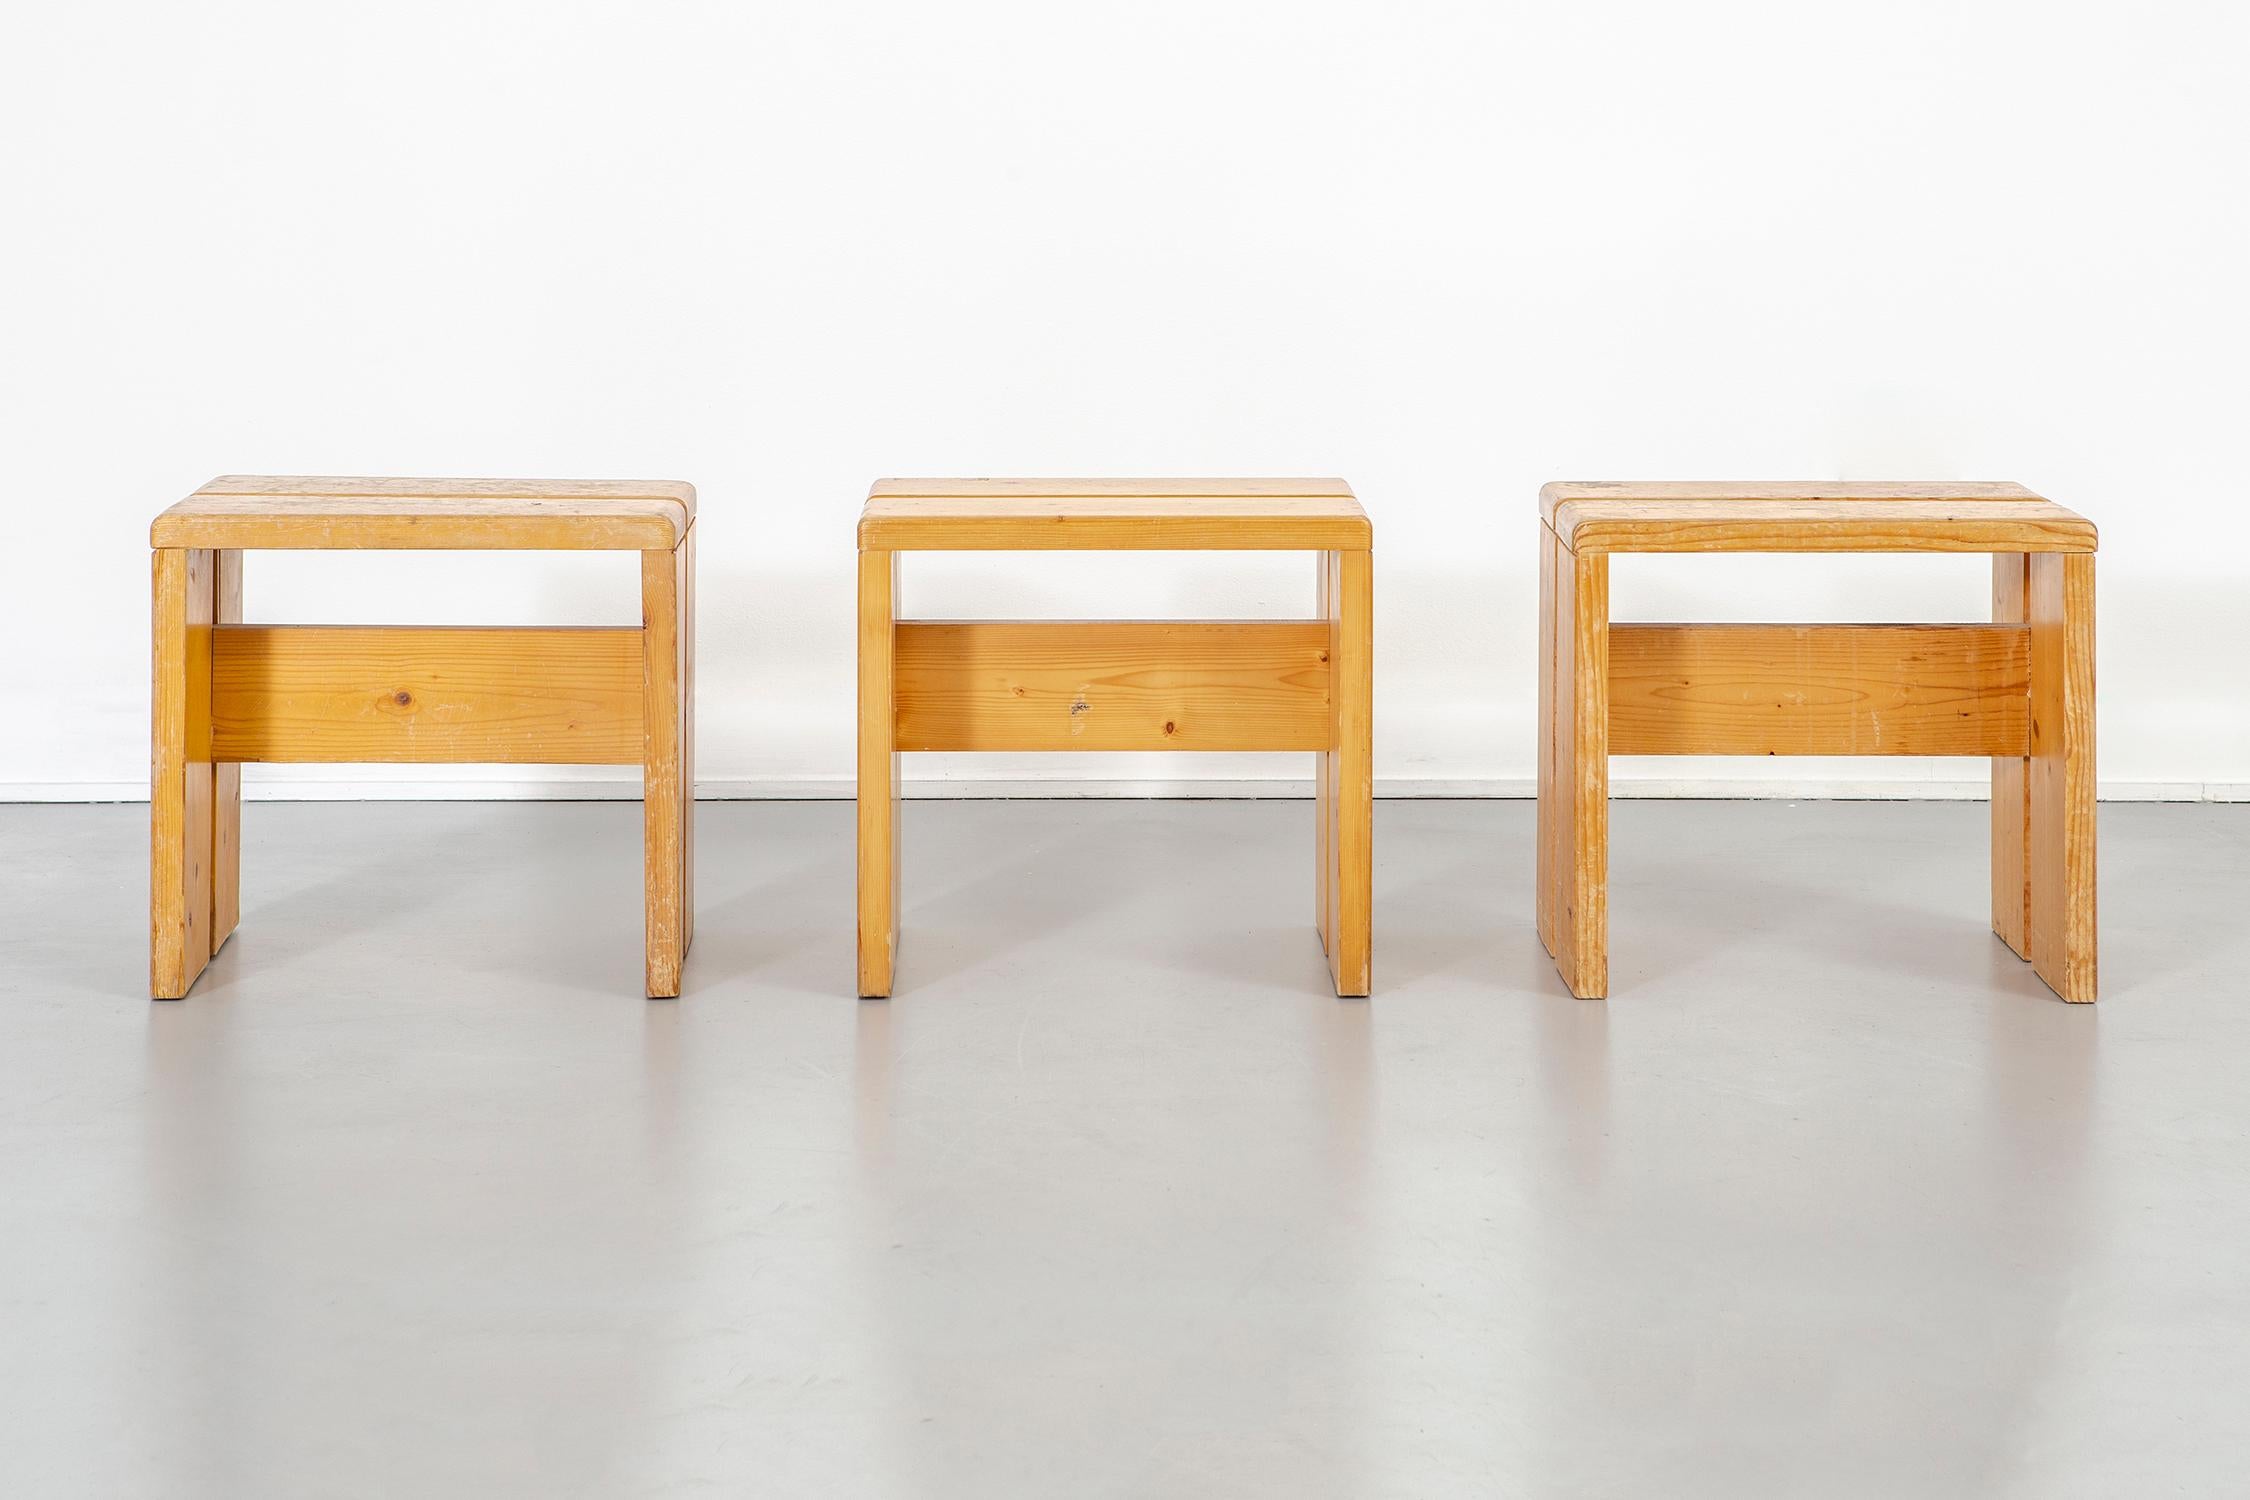 Set of three stools

designed by Charlotte Perriand for Les Arcs.

France, circa 1968.

Pine

Measures: 16 ¾” H x 16 ¾” W x 11 ?” D x seat 16 ¾” H.

Pictured with the corresponding dining table, also available for purchase

Individual stools can be